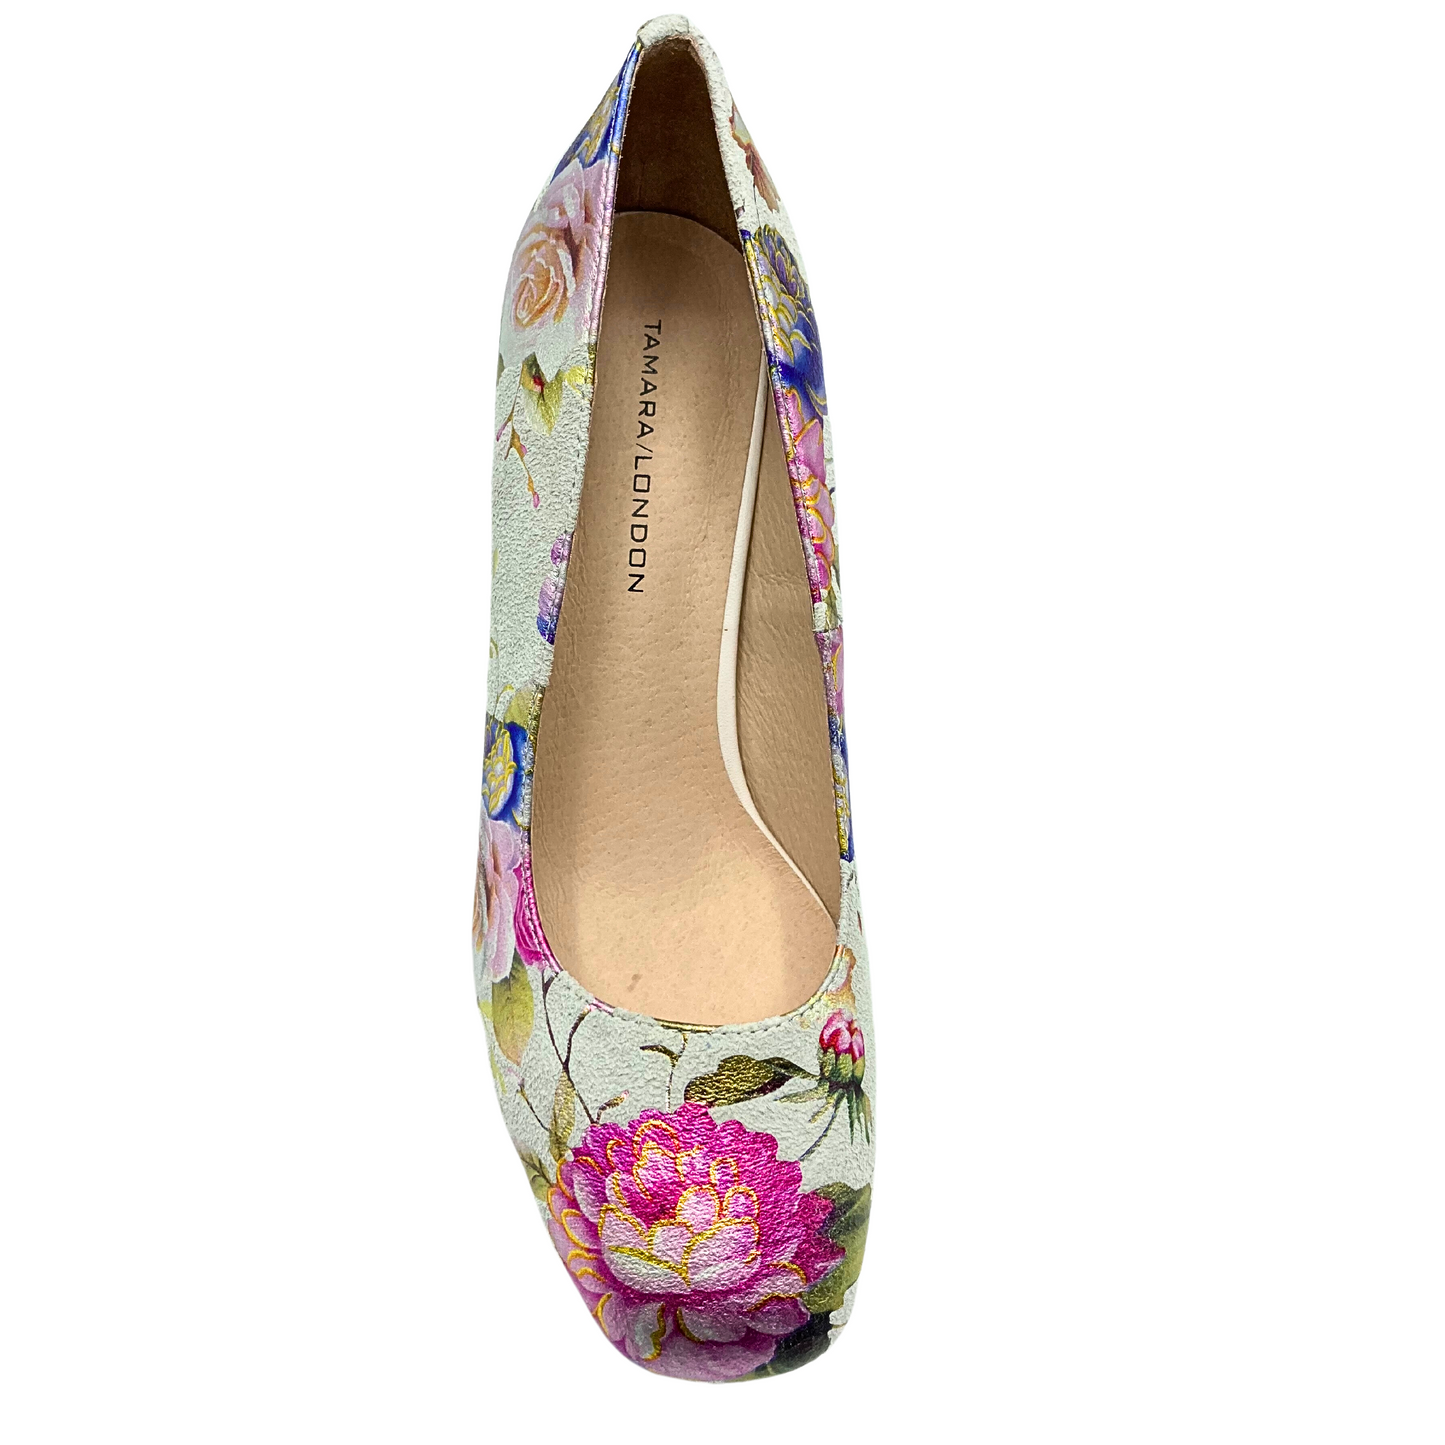 Top down view of a floral pump shoe.  Softly rounded toe.  Shown in a cream leather with painted floral details